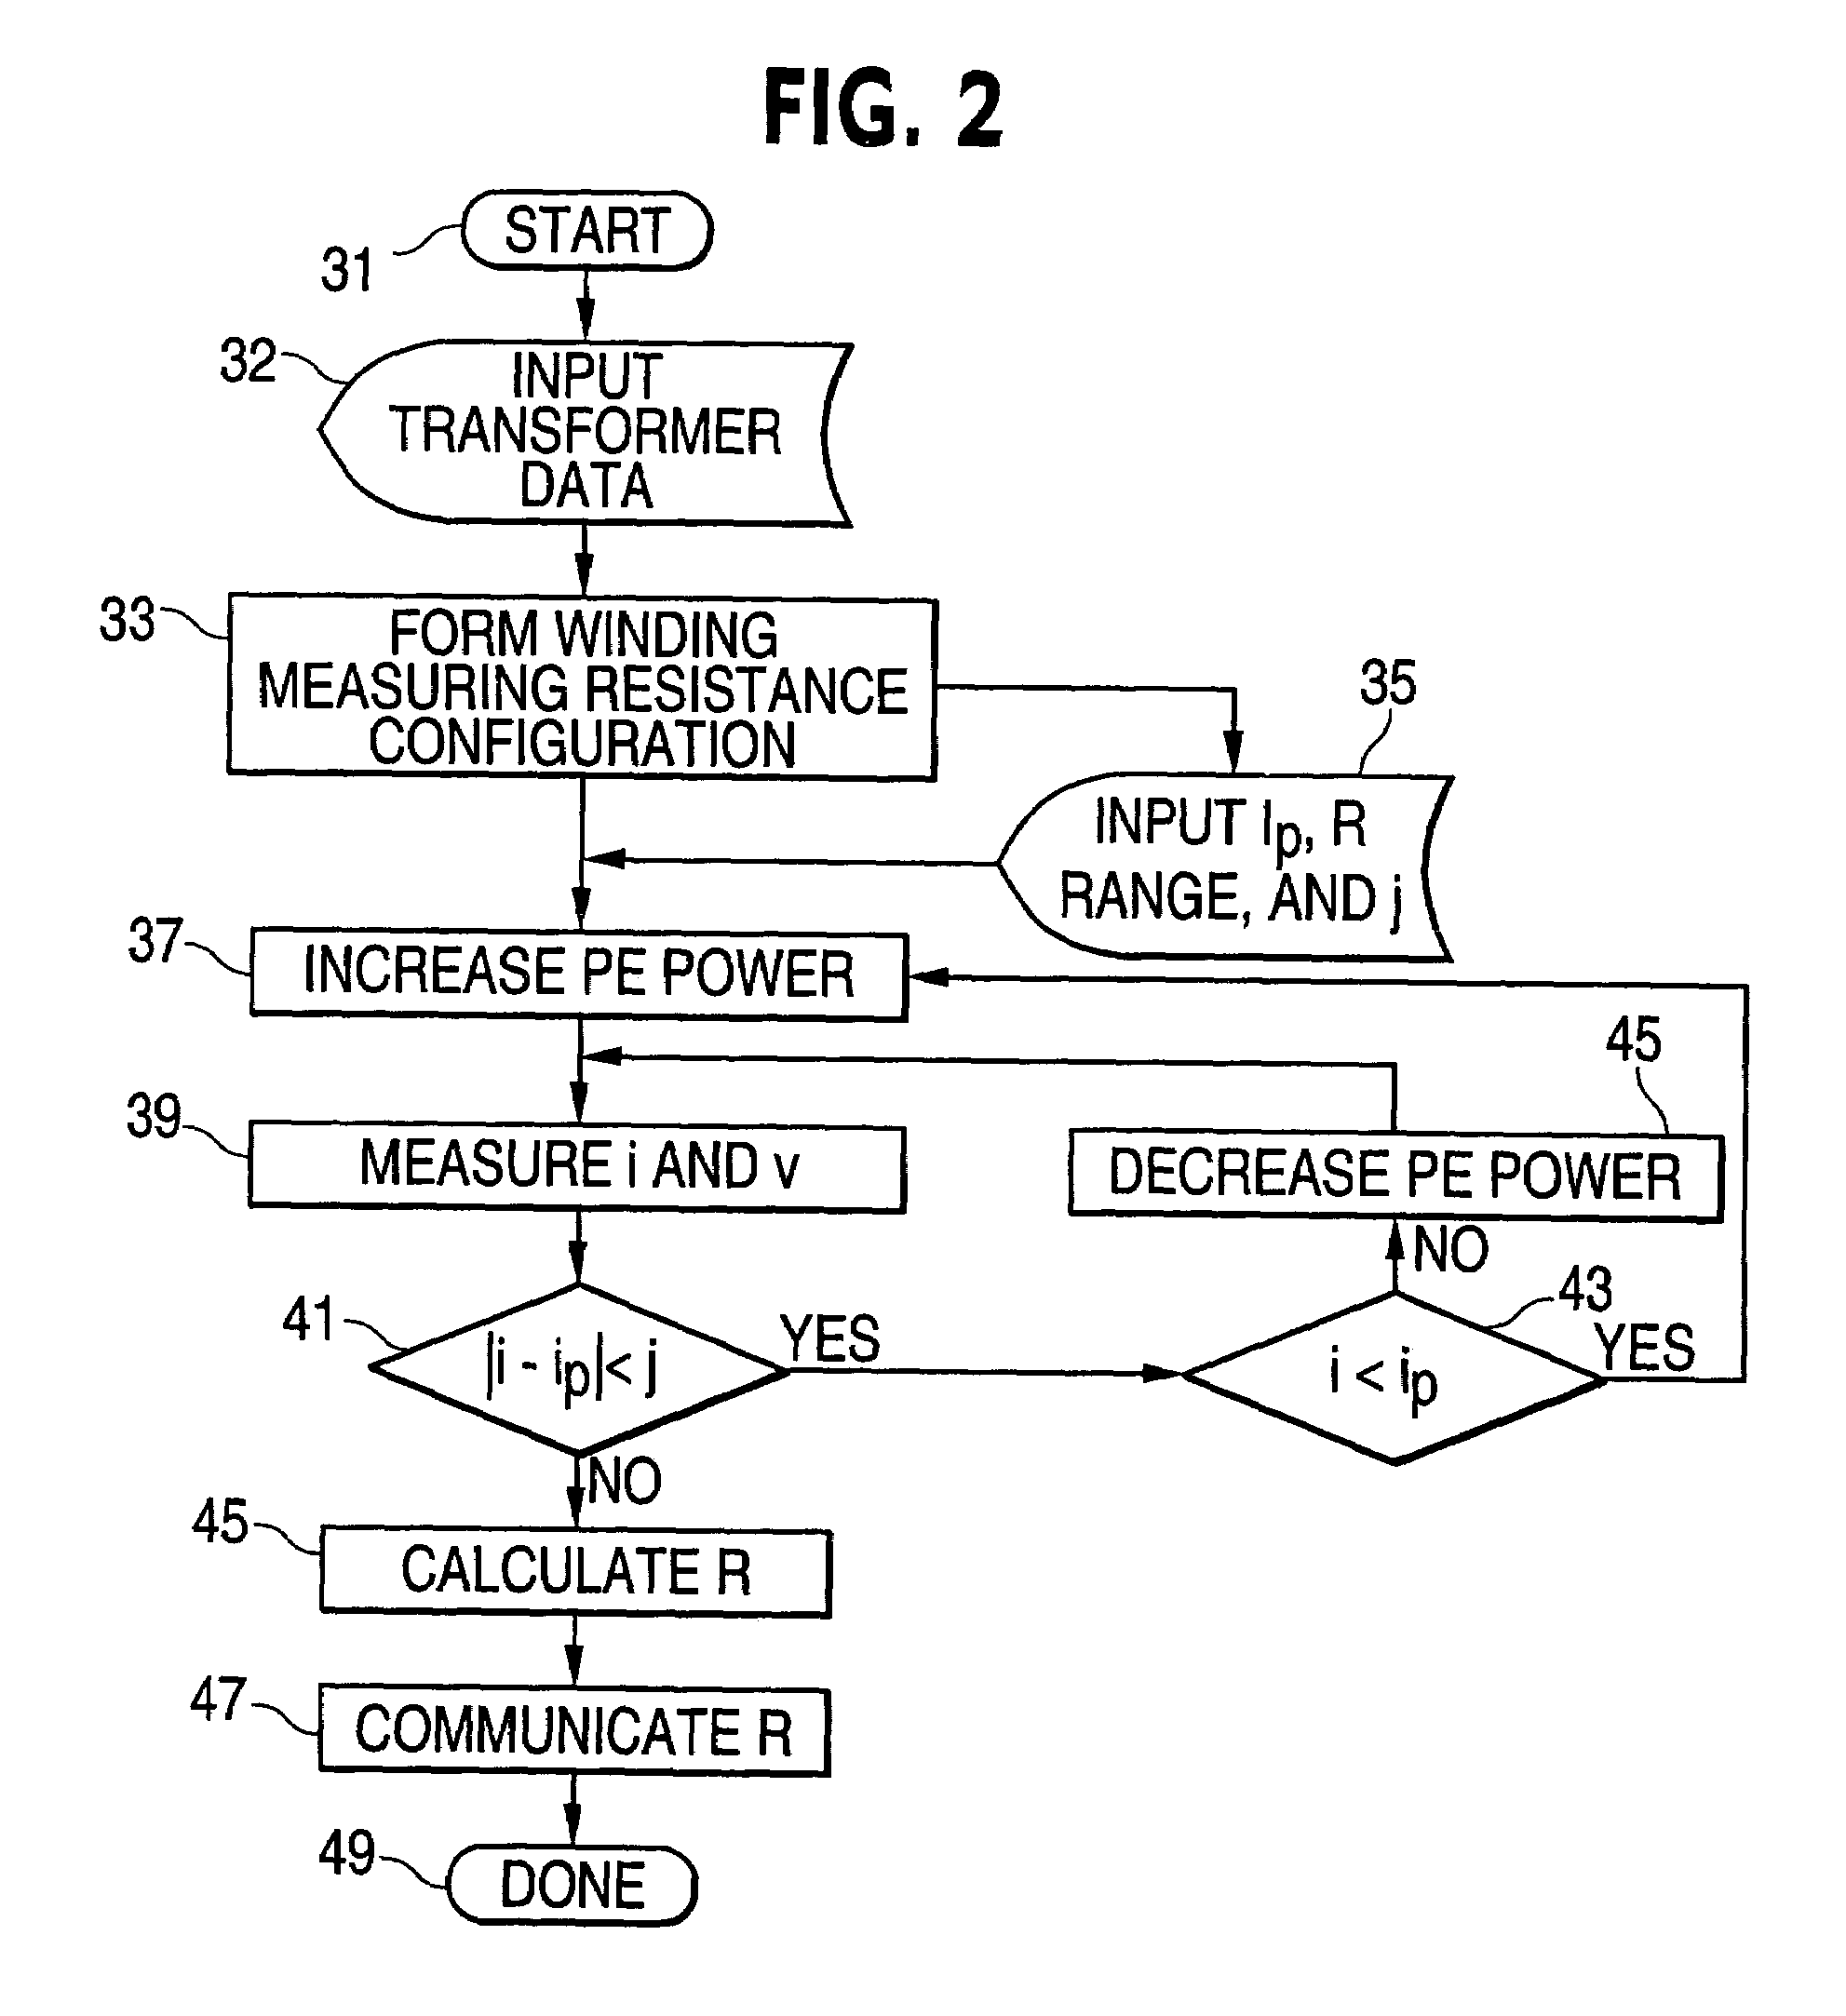 Method and apparatus for measuring transformer winding resistance